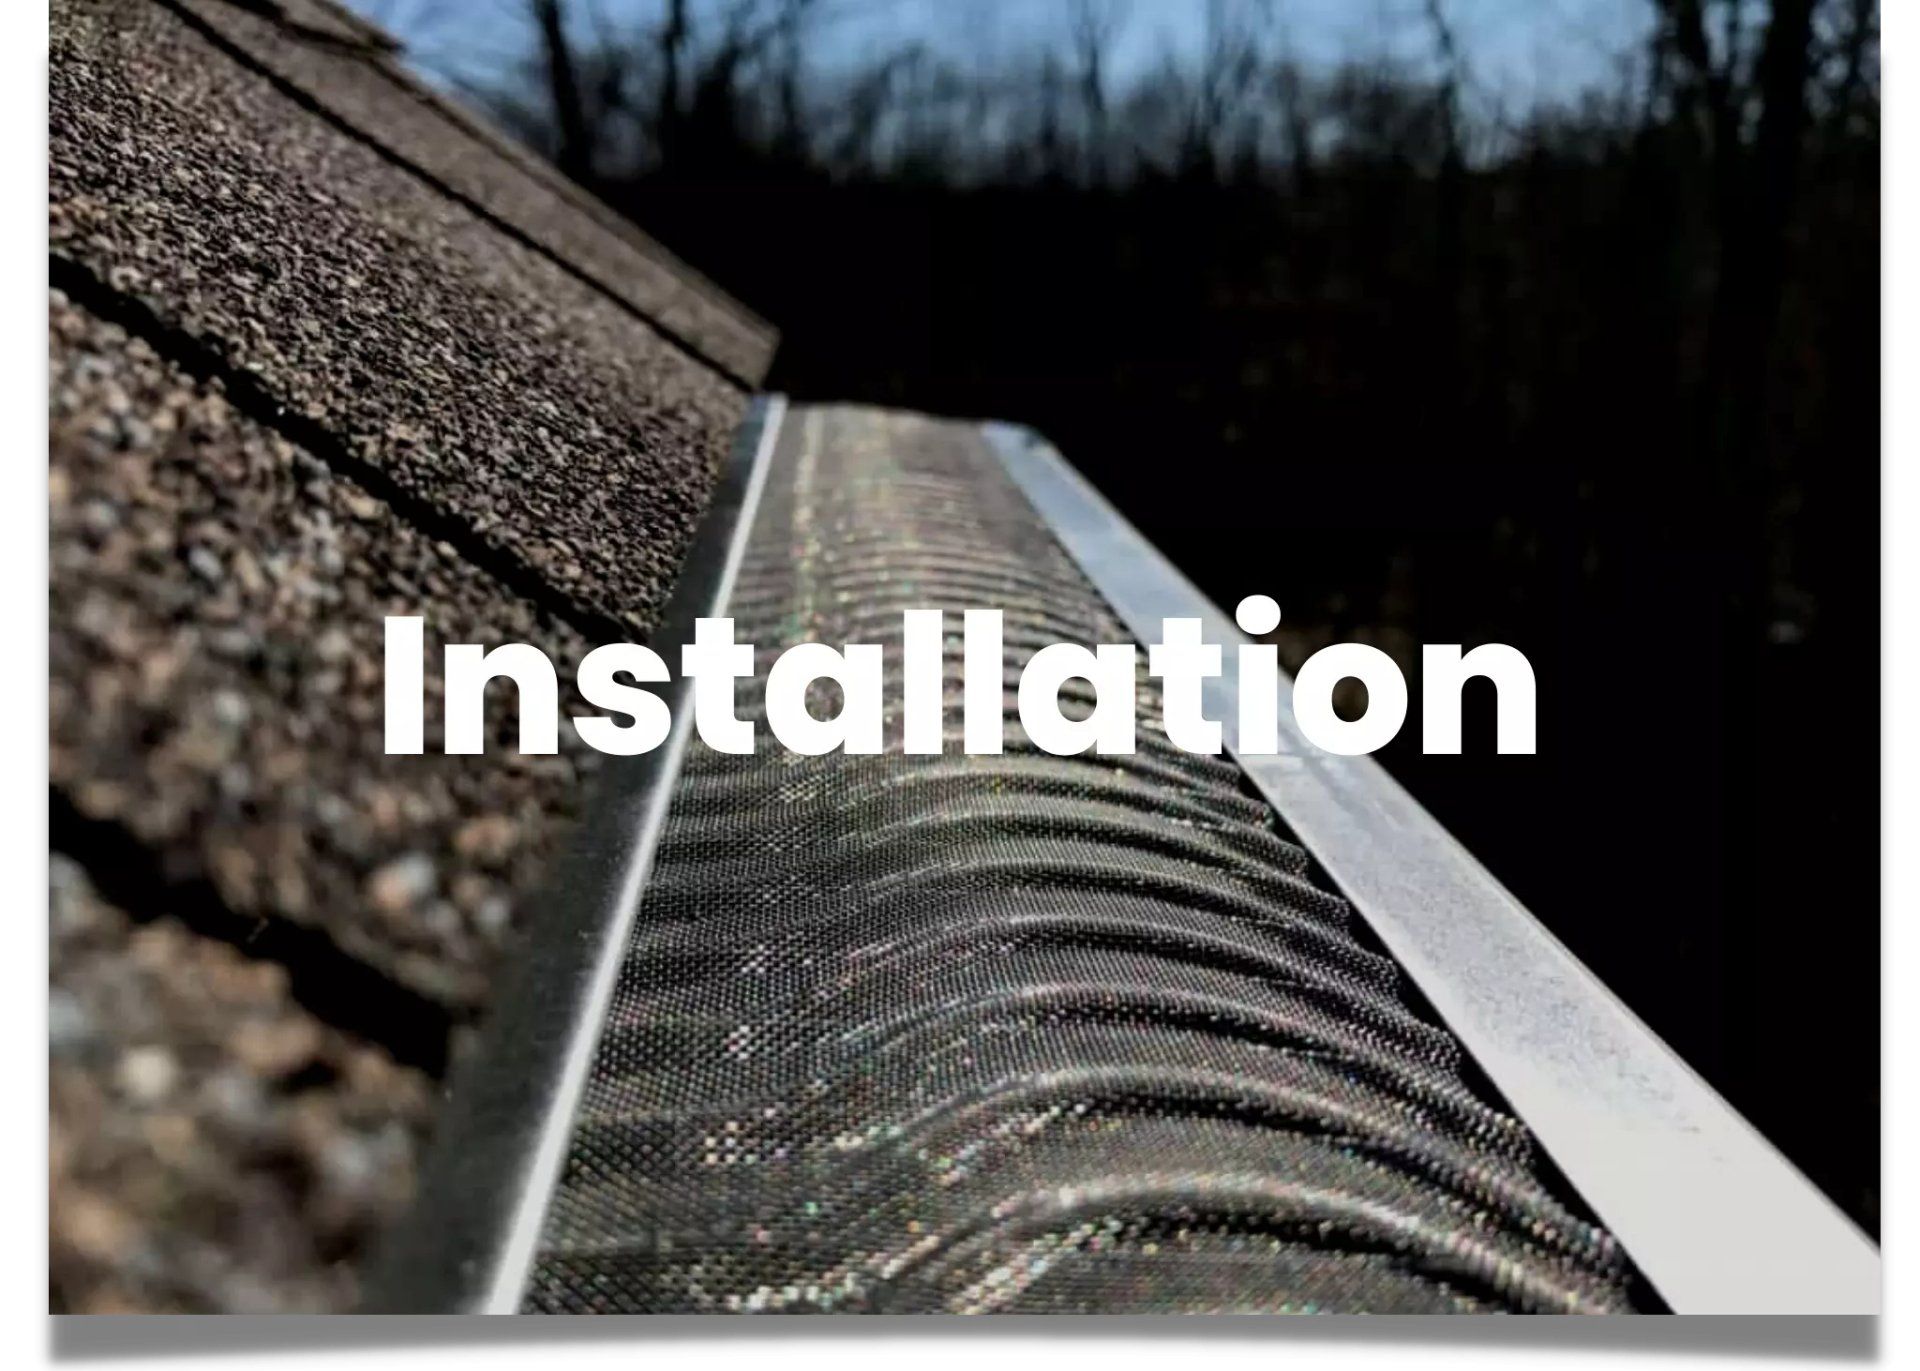 A brand-new gutter system with custom leaf guards we installed.